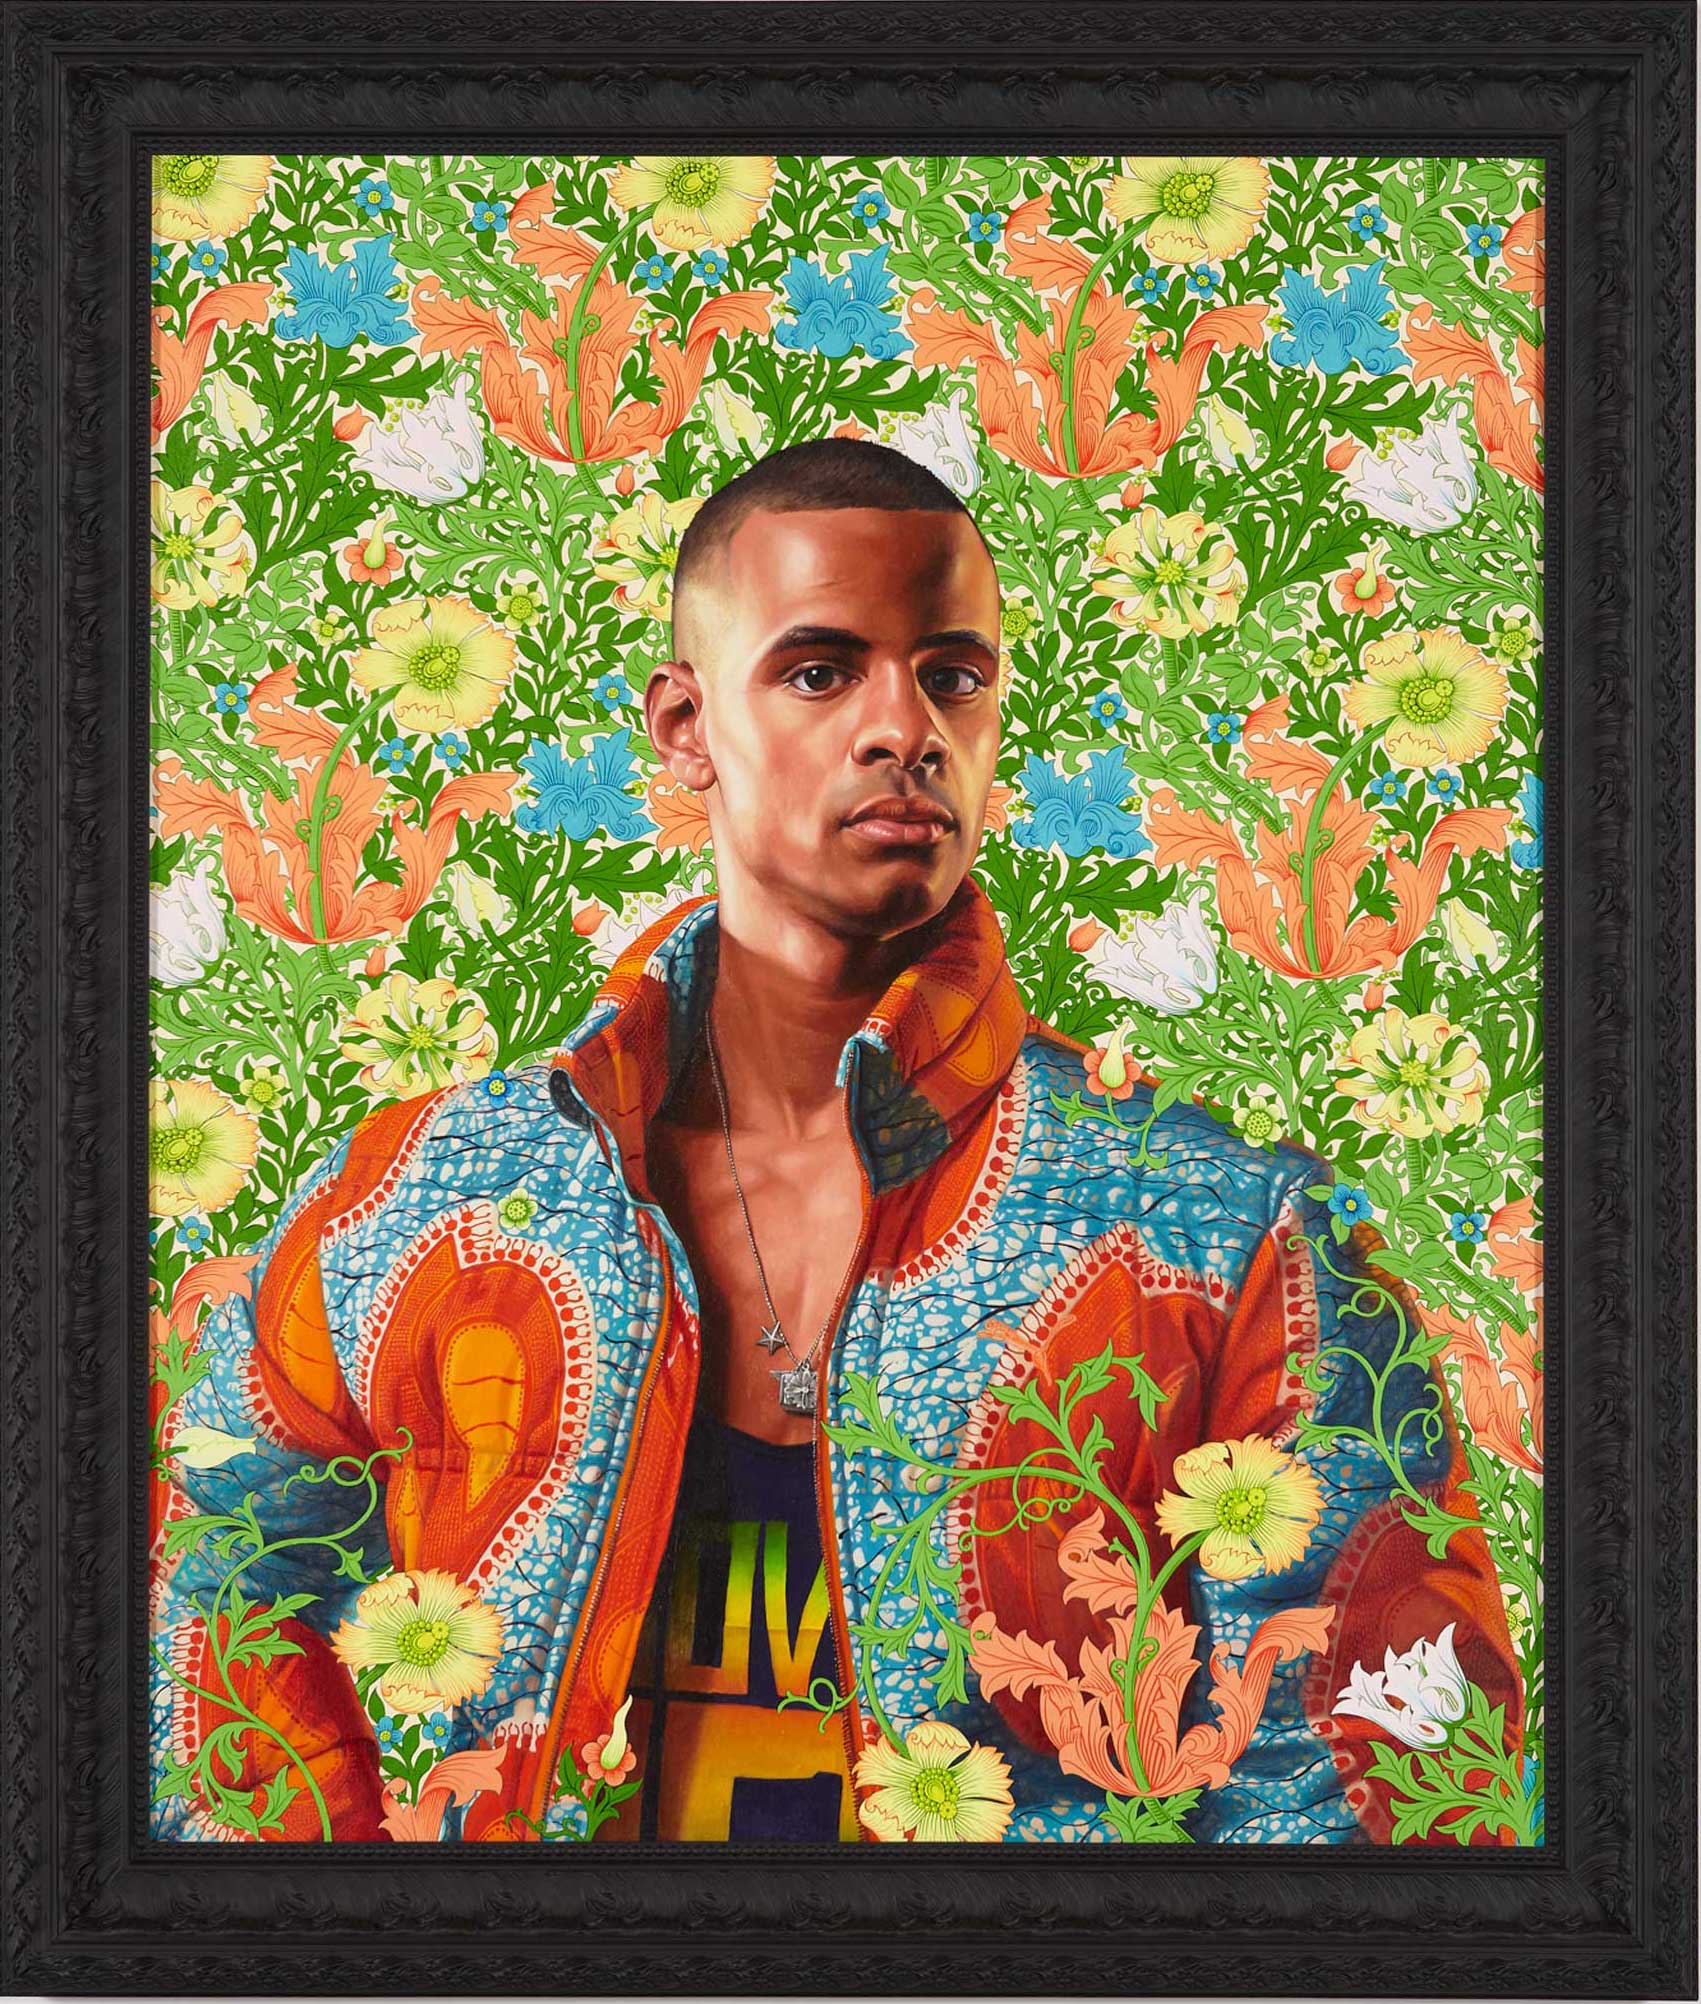 Kehinde Wiley | Selected Works: 2012 | Morthyn Brito, 2012, Oil on Canvas. | 2